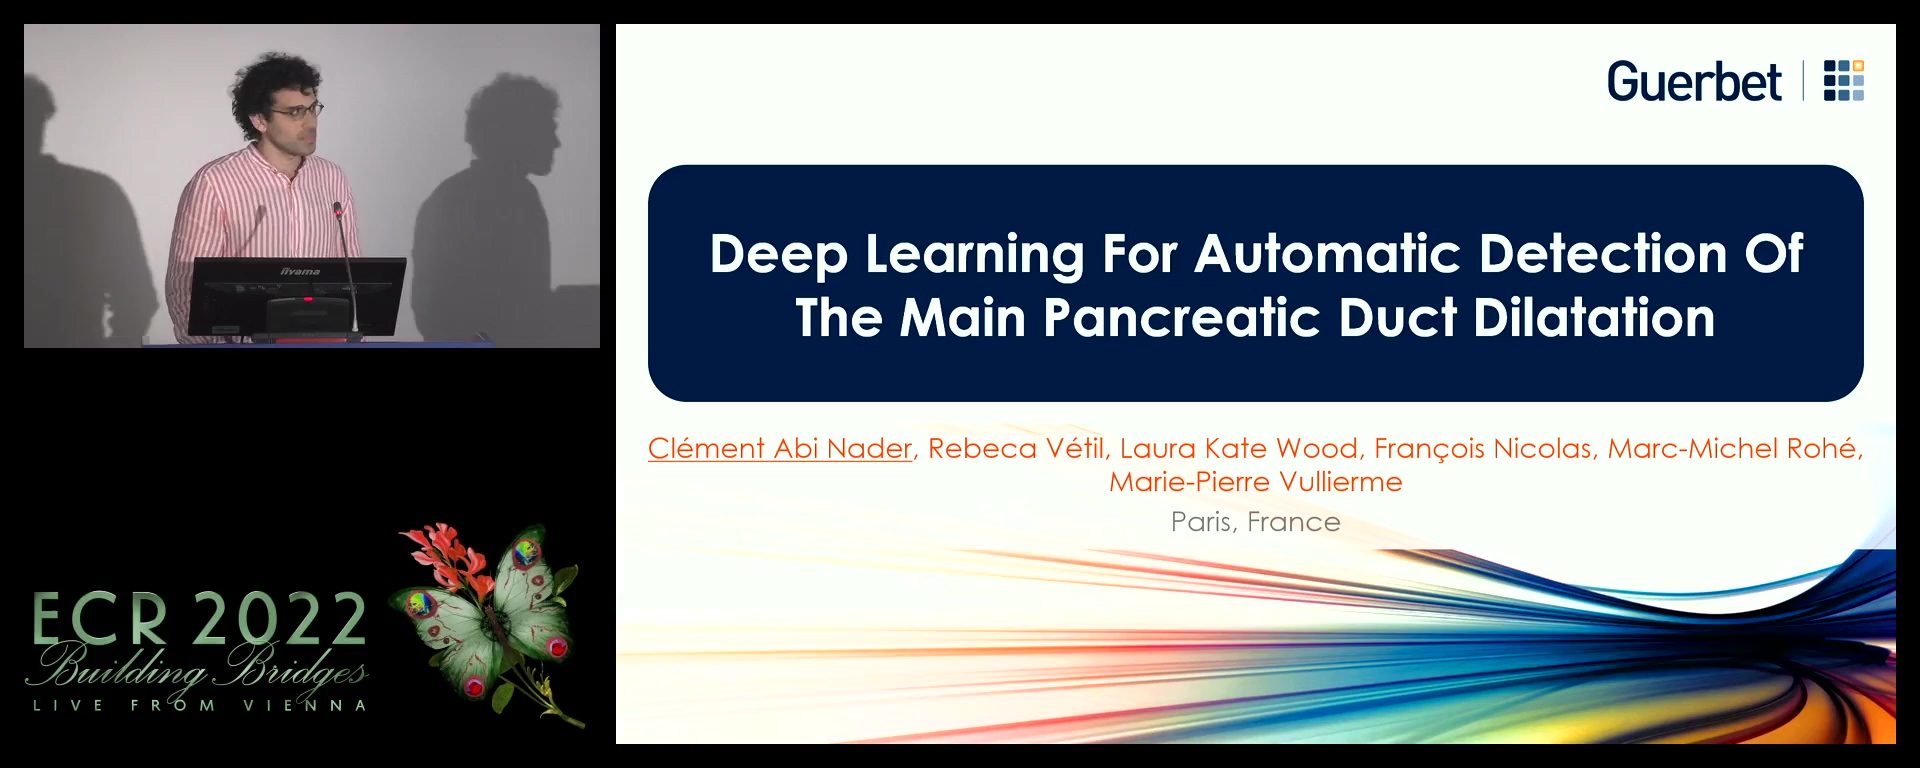 Deep learning for automatic detection of the main pancreatic duct dilatation